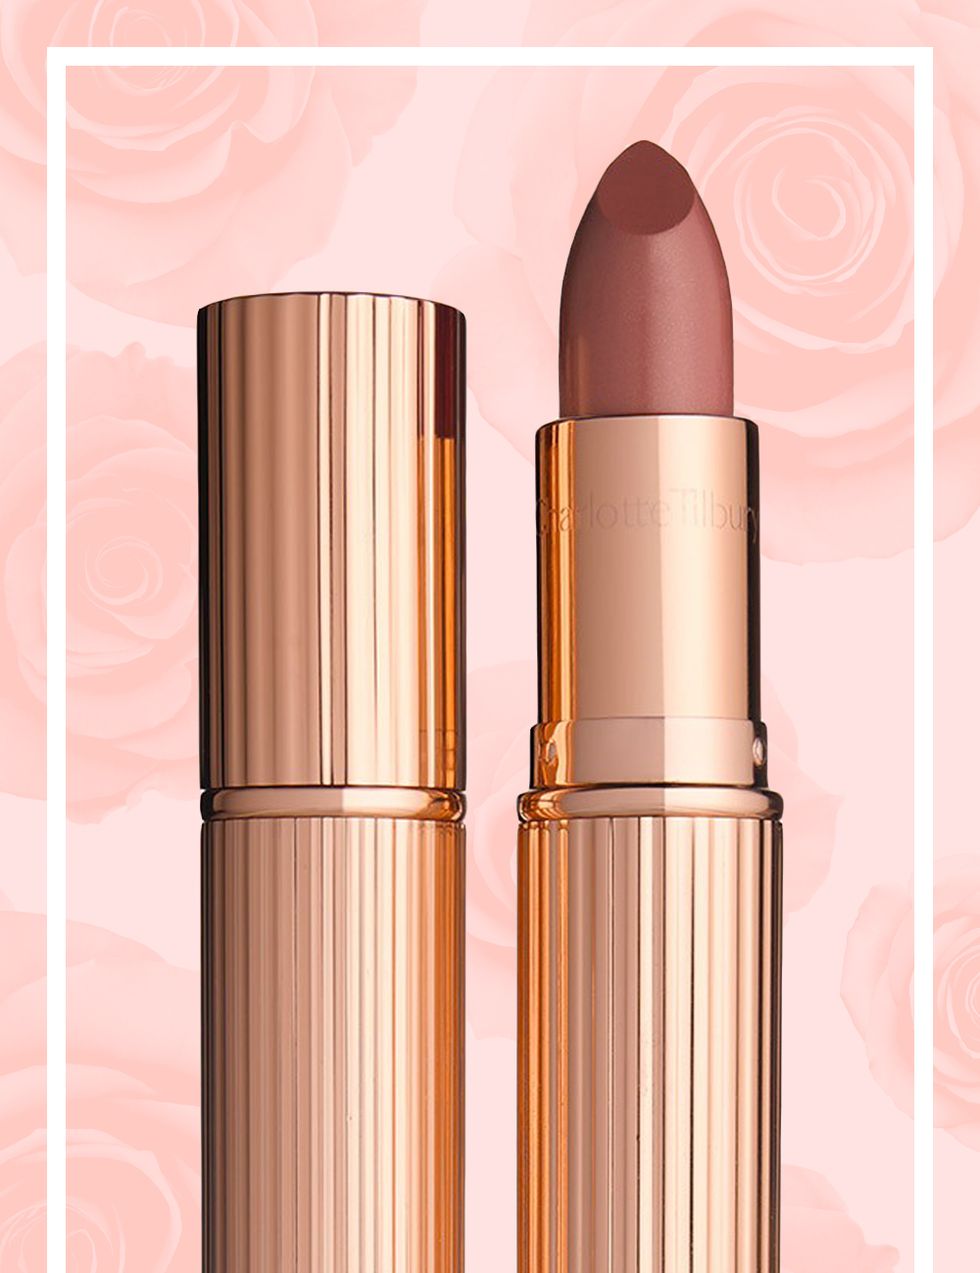 <p>Calling it — mauve is the next big lip color. It has hints of red, pink, and brown, making it a great neutral shade to finish any look. This one also comes in a sleek, vintage-inspired tube that almost looks too good to haphazardly dump into your makeup bag.<br></p><p><em><a href="http://www.charlottetilbury.com/us/k-i-s-s-i-n-g-stoned-rose.html?gclid=CjwKEAjwuPi3BRClk8TyyMLloxgSJAAC0XsjaIxS8NXgPlsWb7S115y7MOLwY9dGDd03XIbGbKeO-RoChyHw_wcB" target="_blank">Charlotte Tilbury Lipstick</a>, $32</em></p>